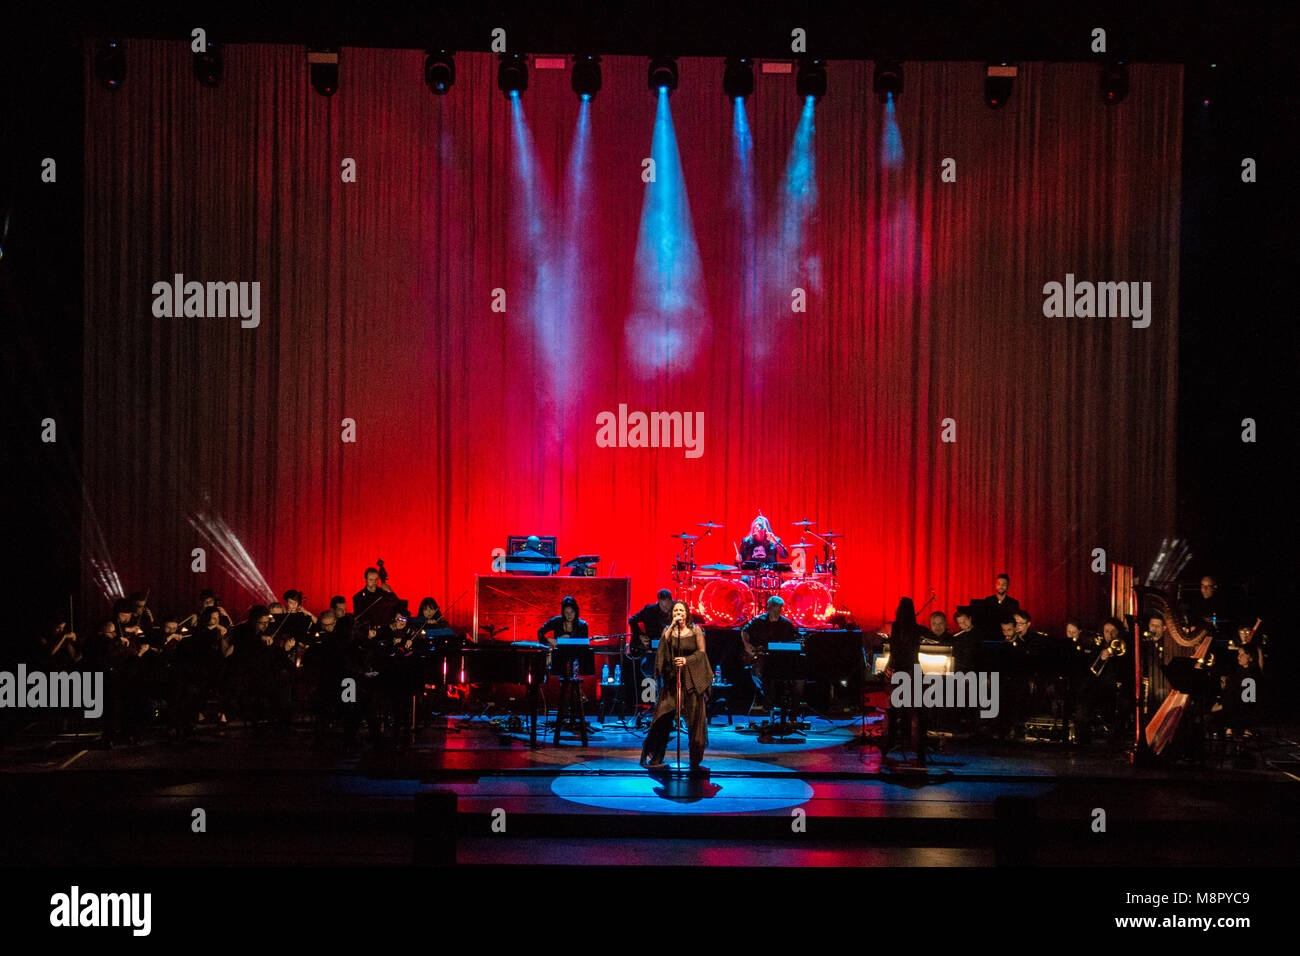 Milan Italy. 19th March 2018. The American rock band EVANESCENCE performs live on stage at Teatro Degli Arcimboldi during the 'Synthesis Tour'. Credit: Rodolfo Sassano/Alamy Live News Stock Photo